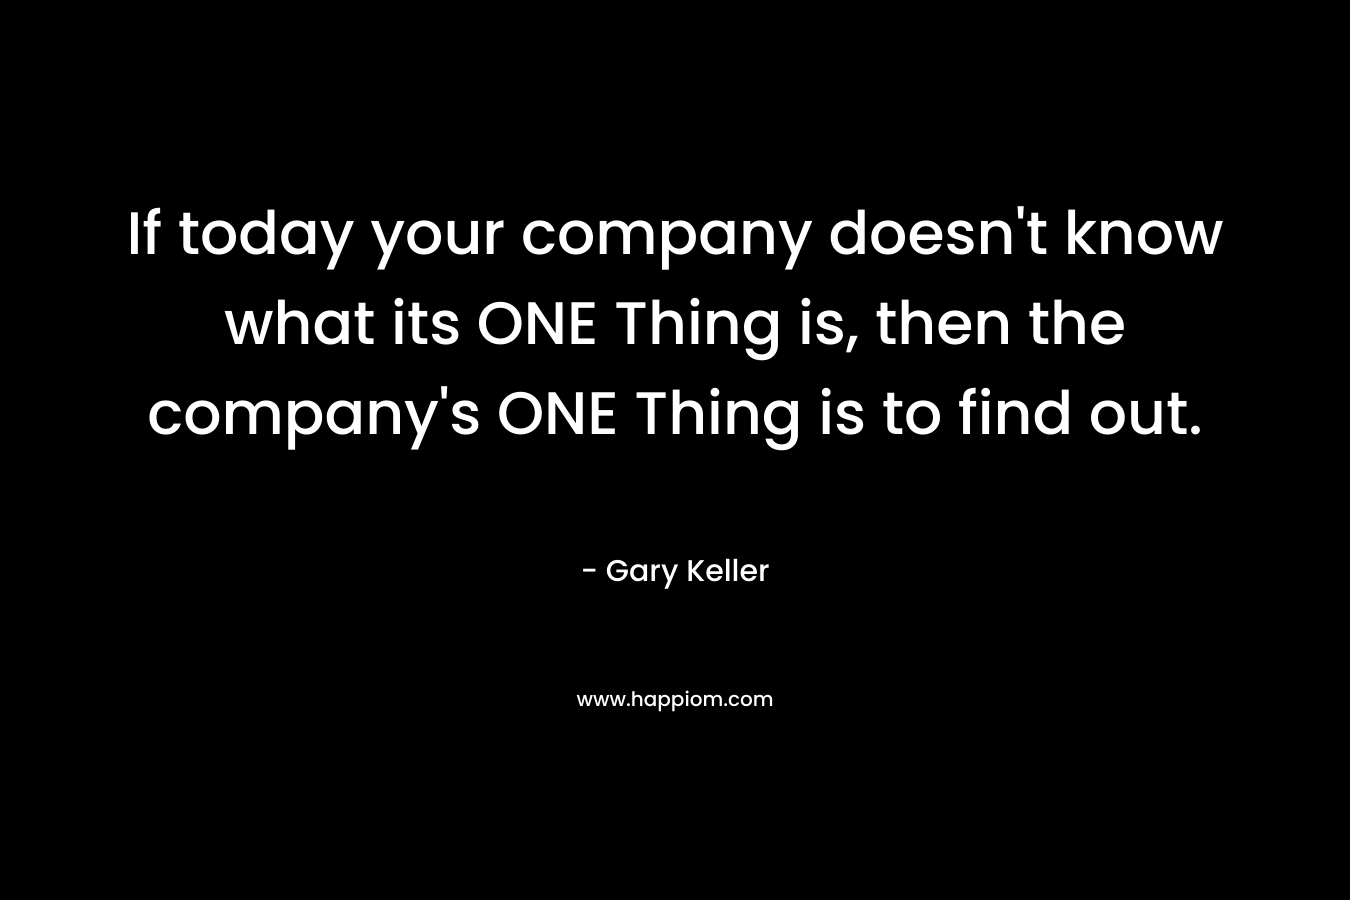 If today your company doesn't know what its ONE Thing is, then the company's ONE Thing is to find out.